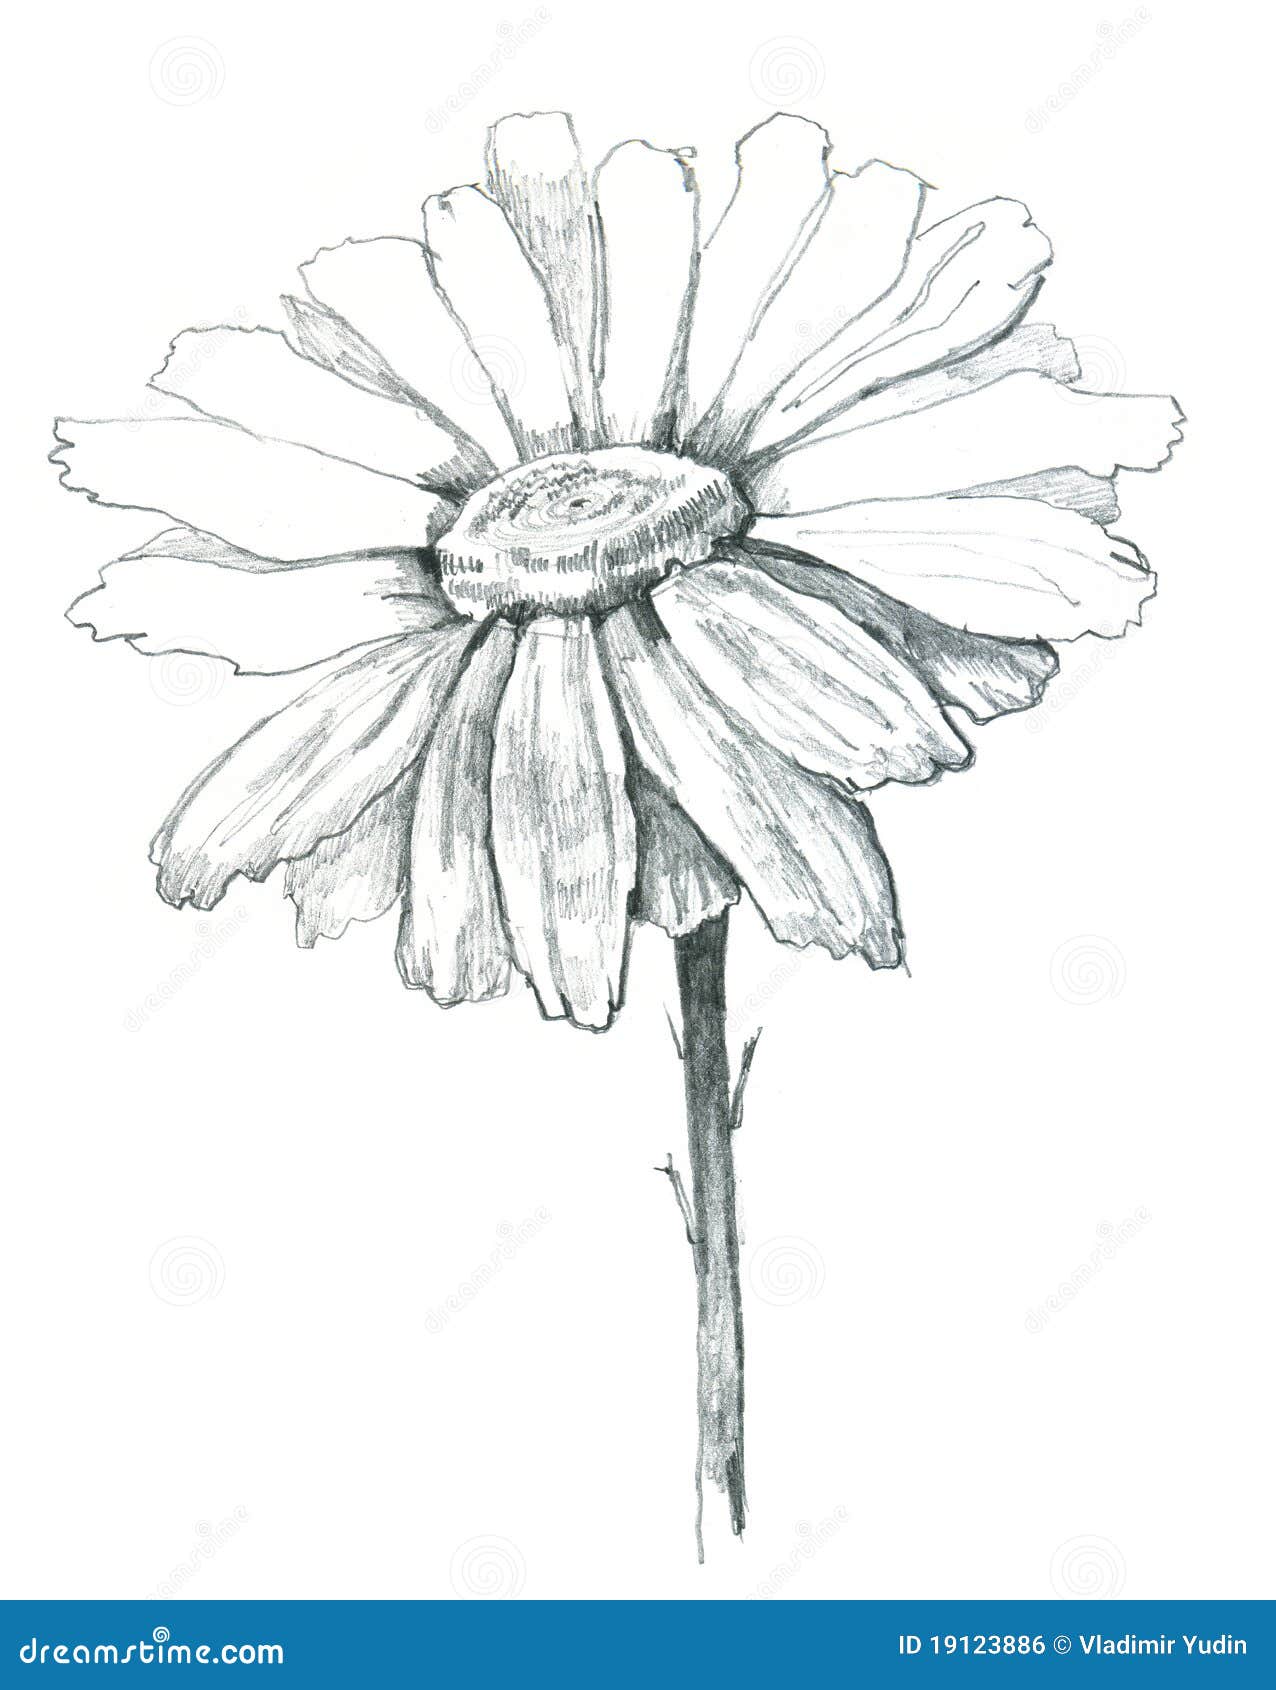 Draw a how daisy sketch to Cactus Drawing